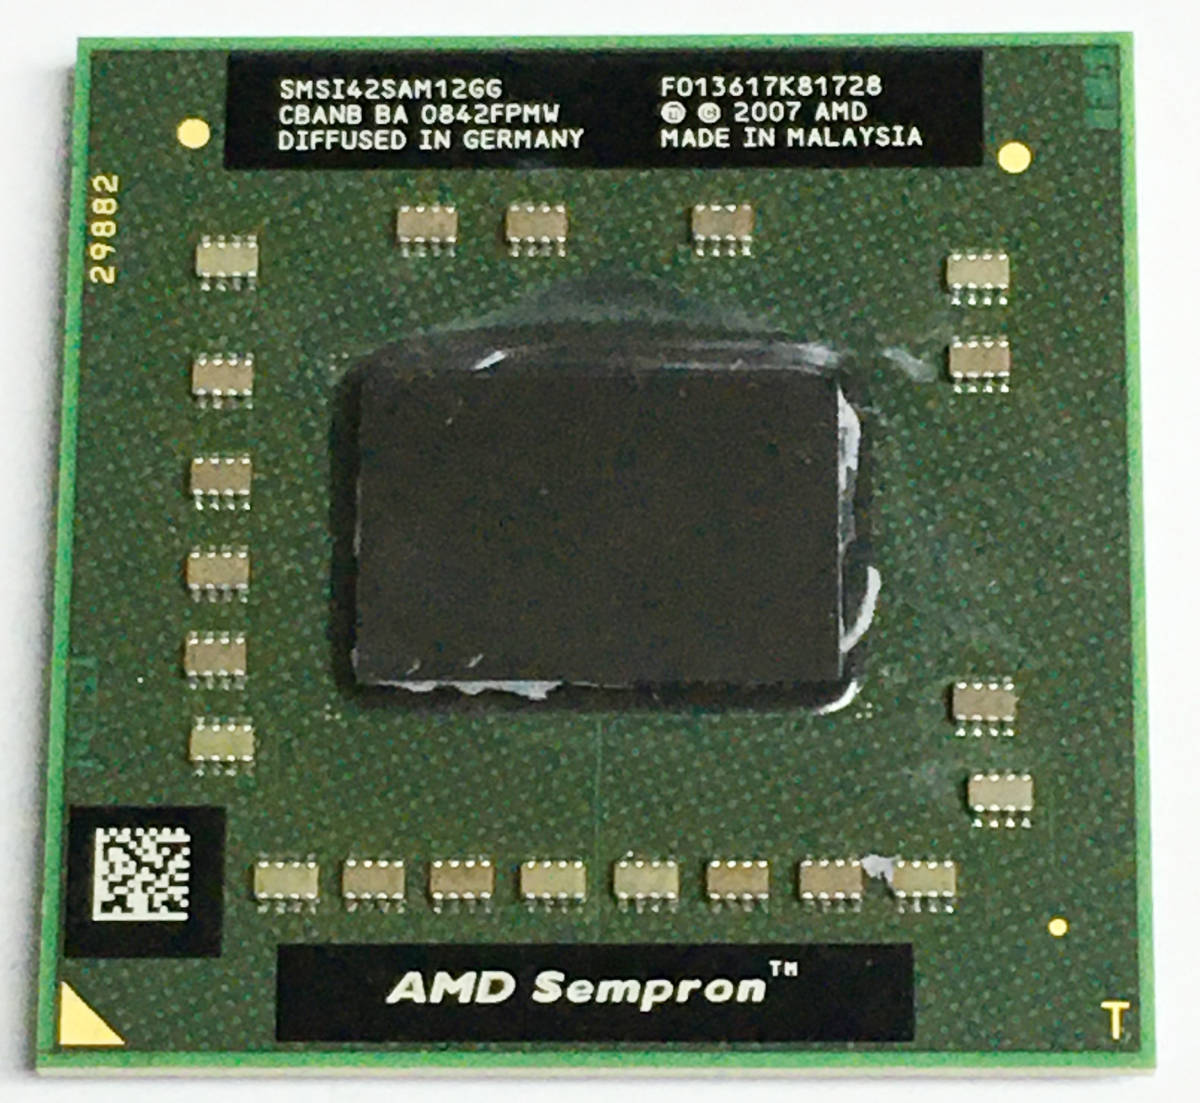 [ used parts ][CPU] several possible bulk buying . postage . profit!!AMD Mobile Sempron SI-42 2.1GHz Socket S1 (S1g2)#AMD SMSI42SAM12GG